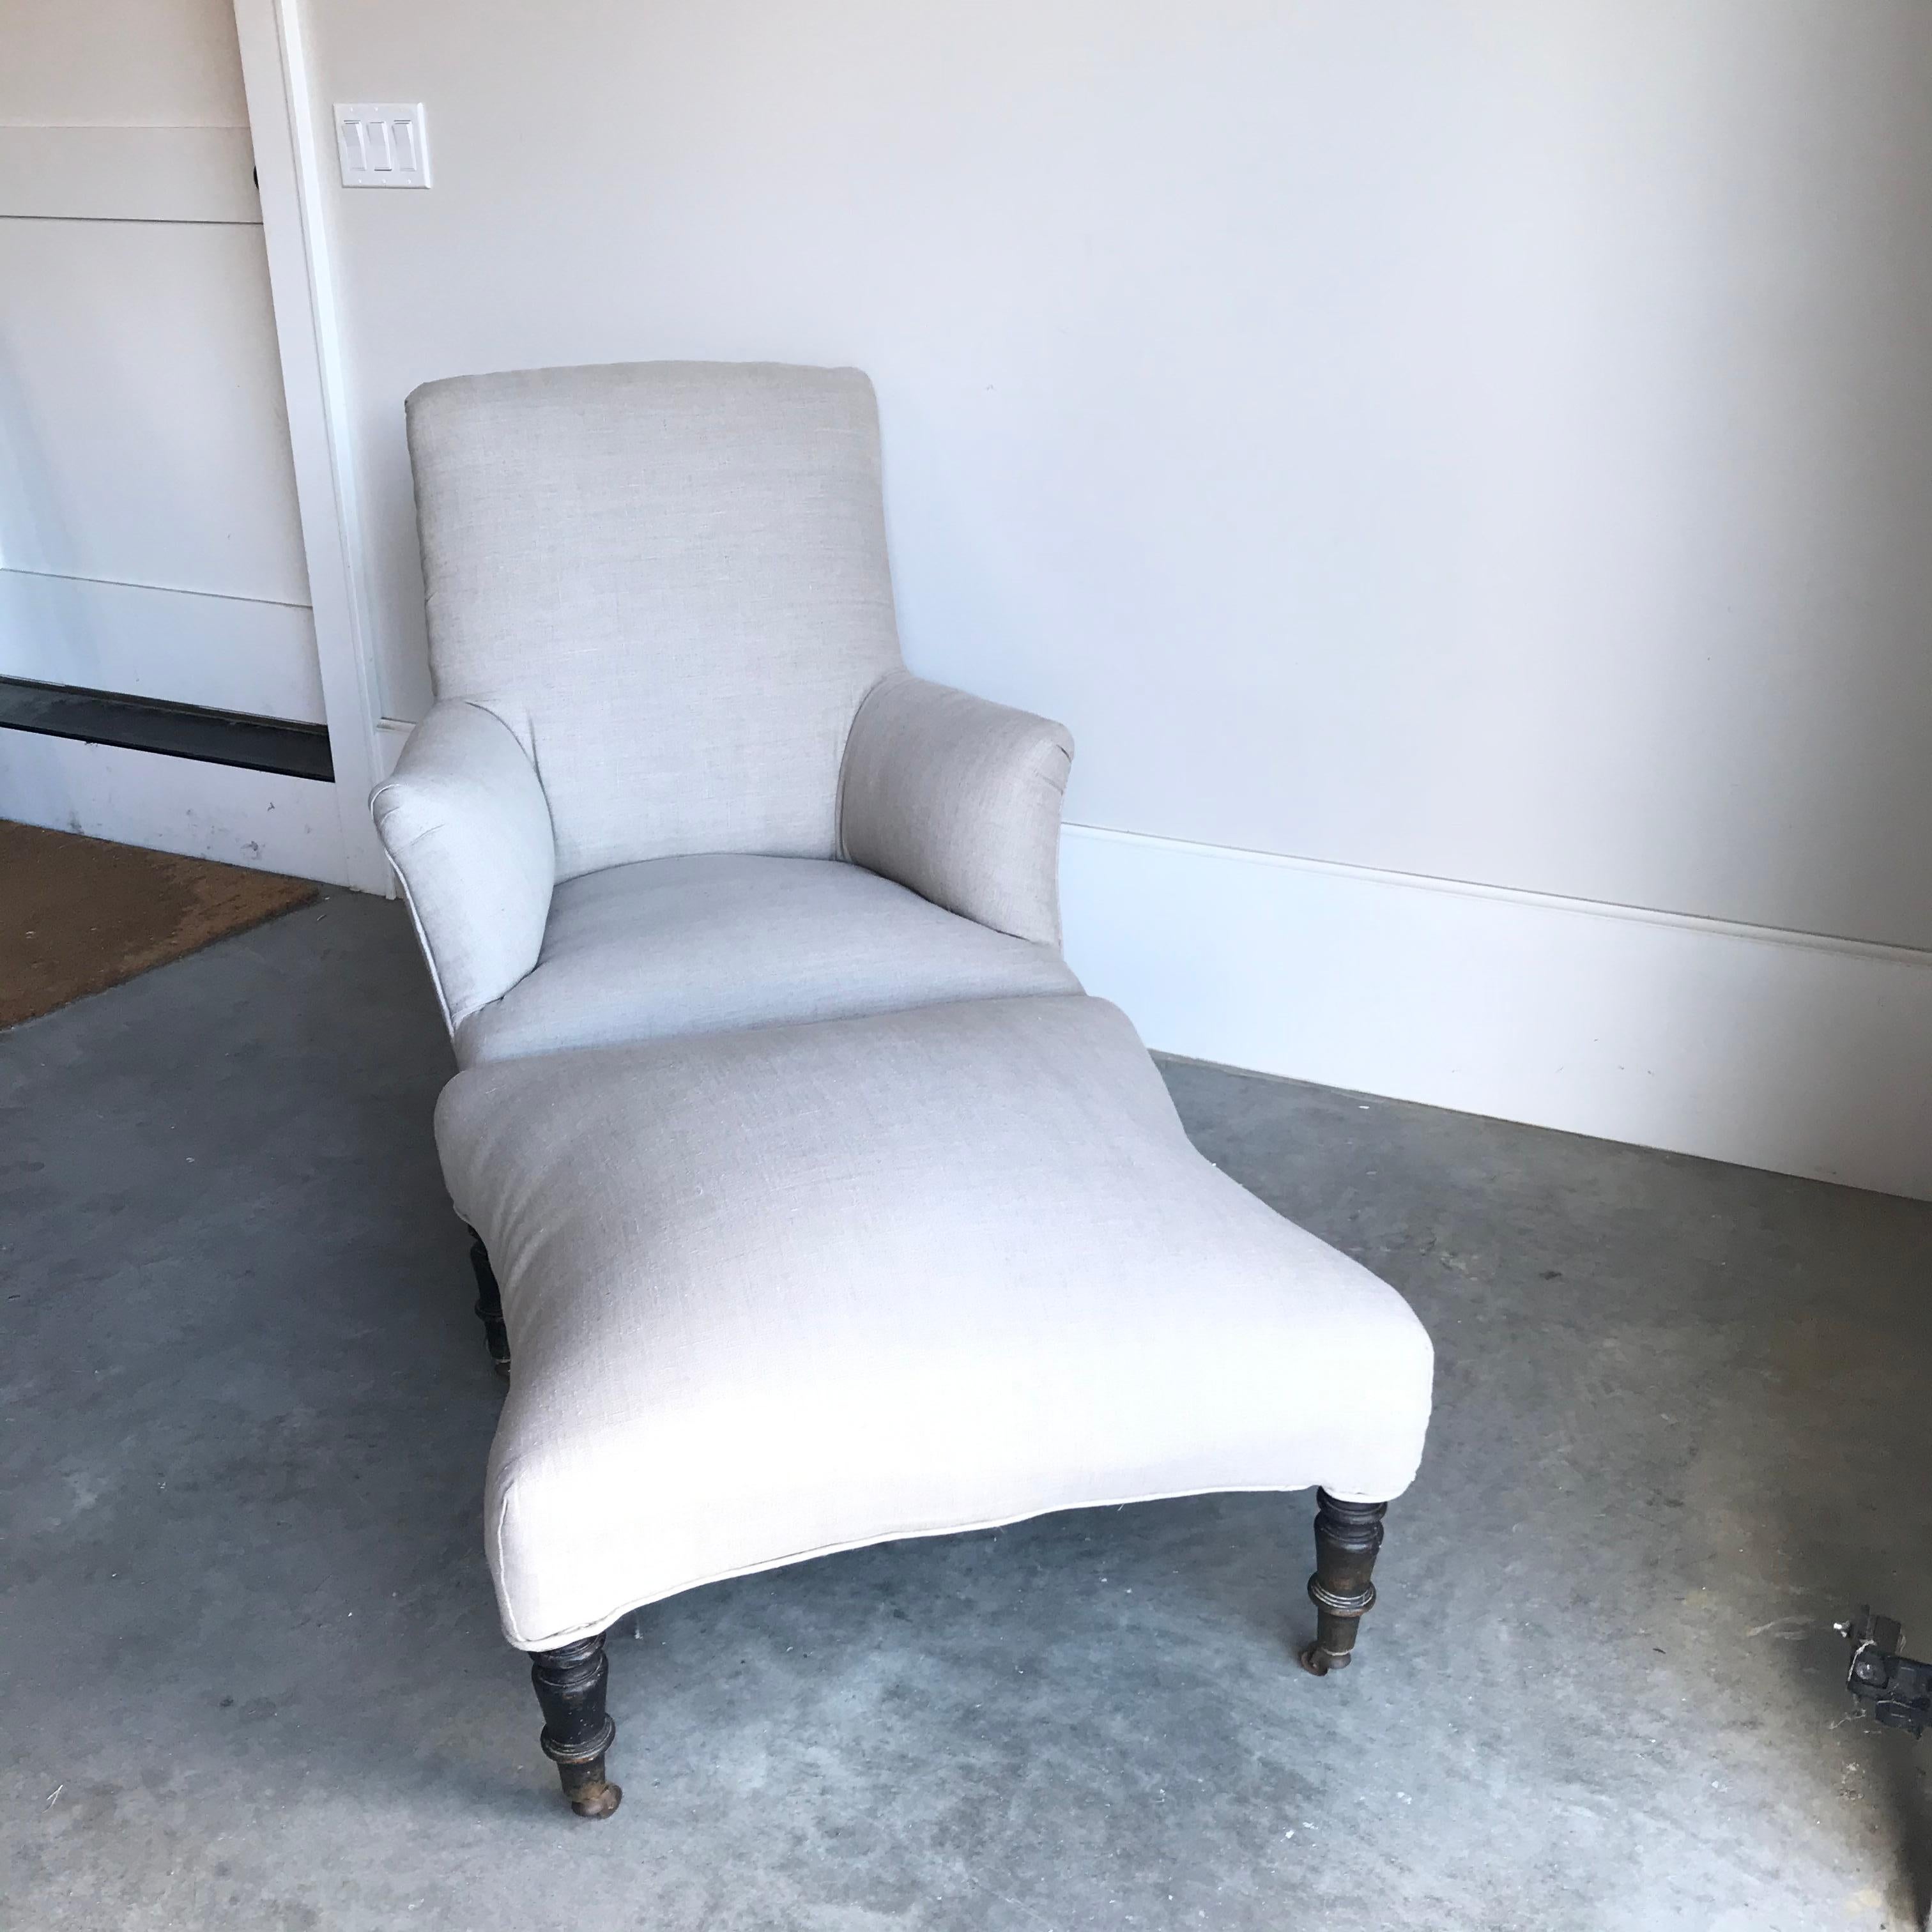 A 19th century French chair and ottoman set. Curved ottoman fits into chair seat to create a chaise lounge. New French linen upholstery.
#4265 

Measures: ottoman 17